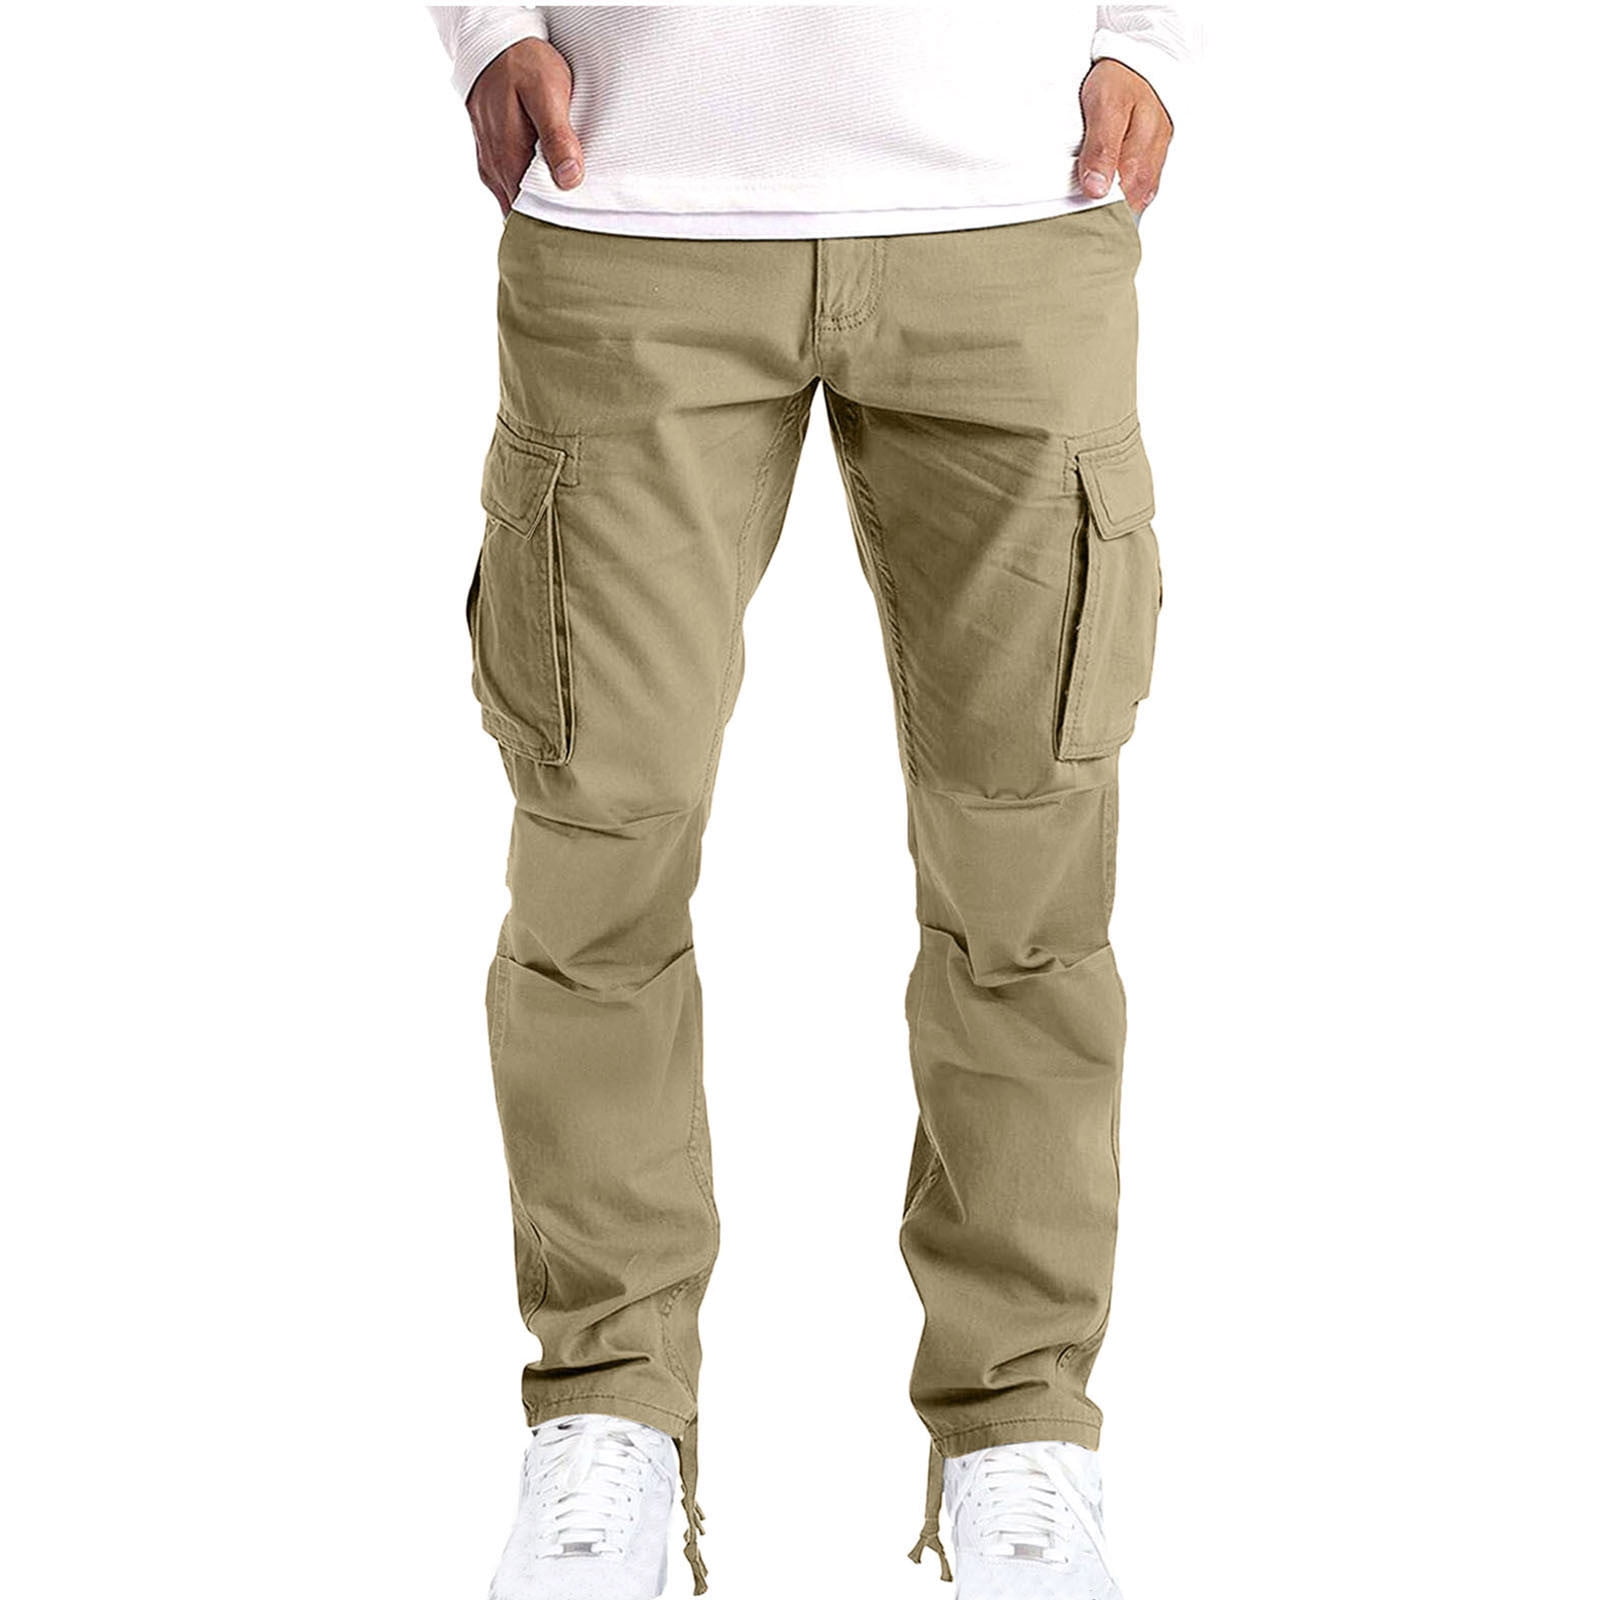 Cargo Pants for Men Stretch Hiking Pants Lightweight Tactical Pant ...